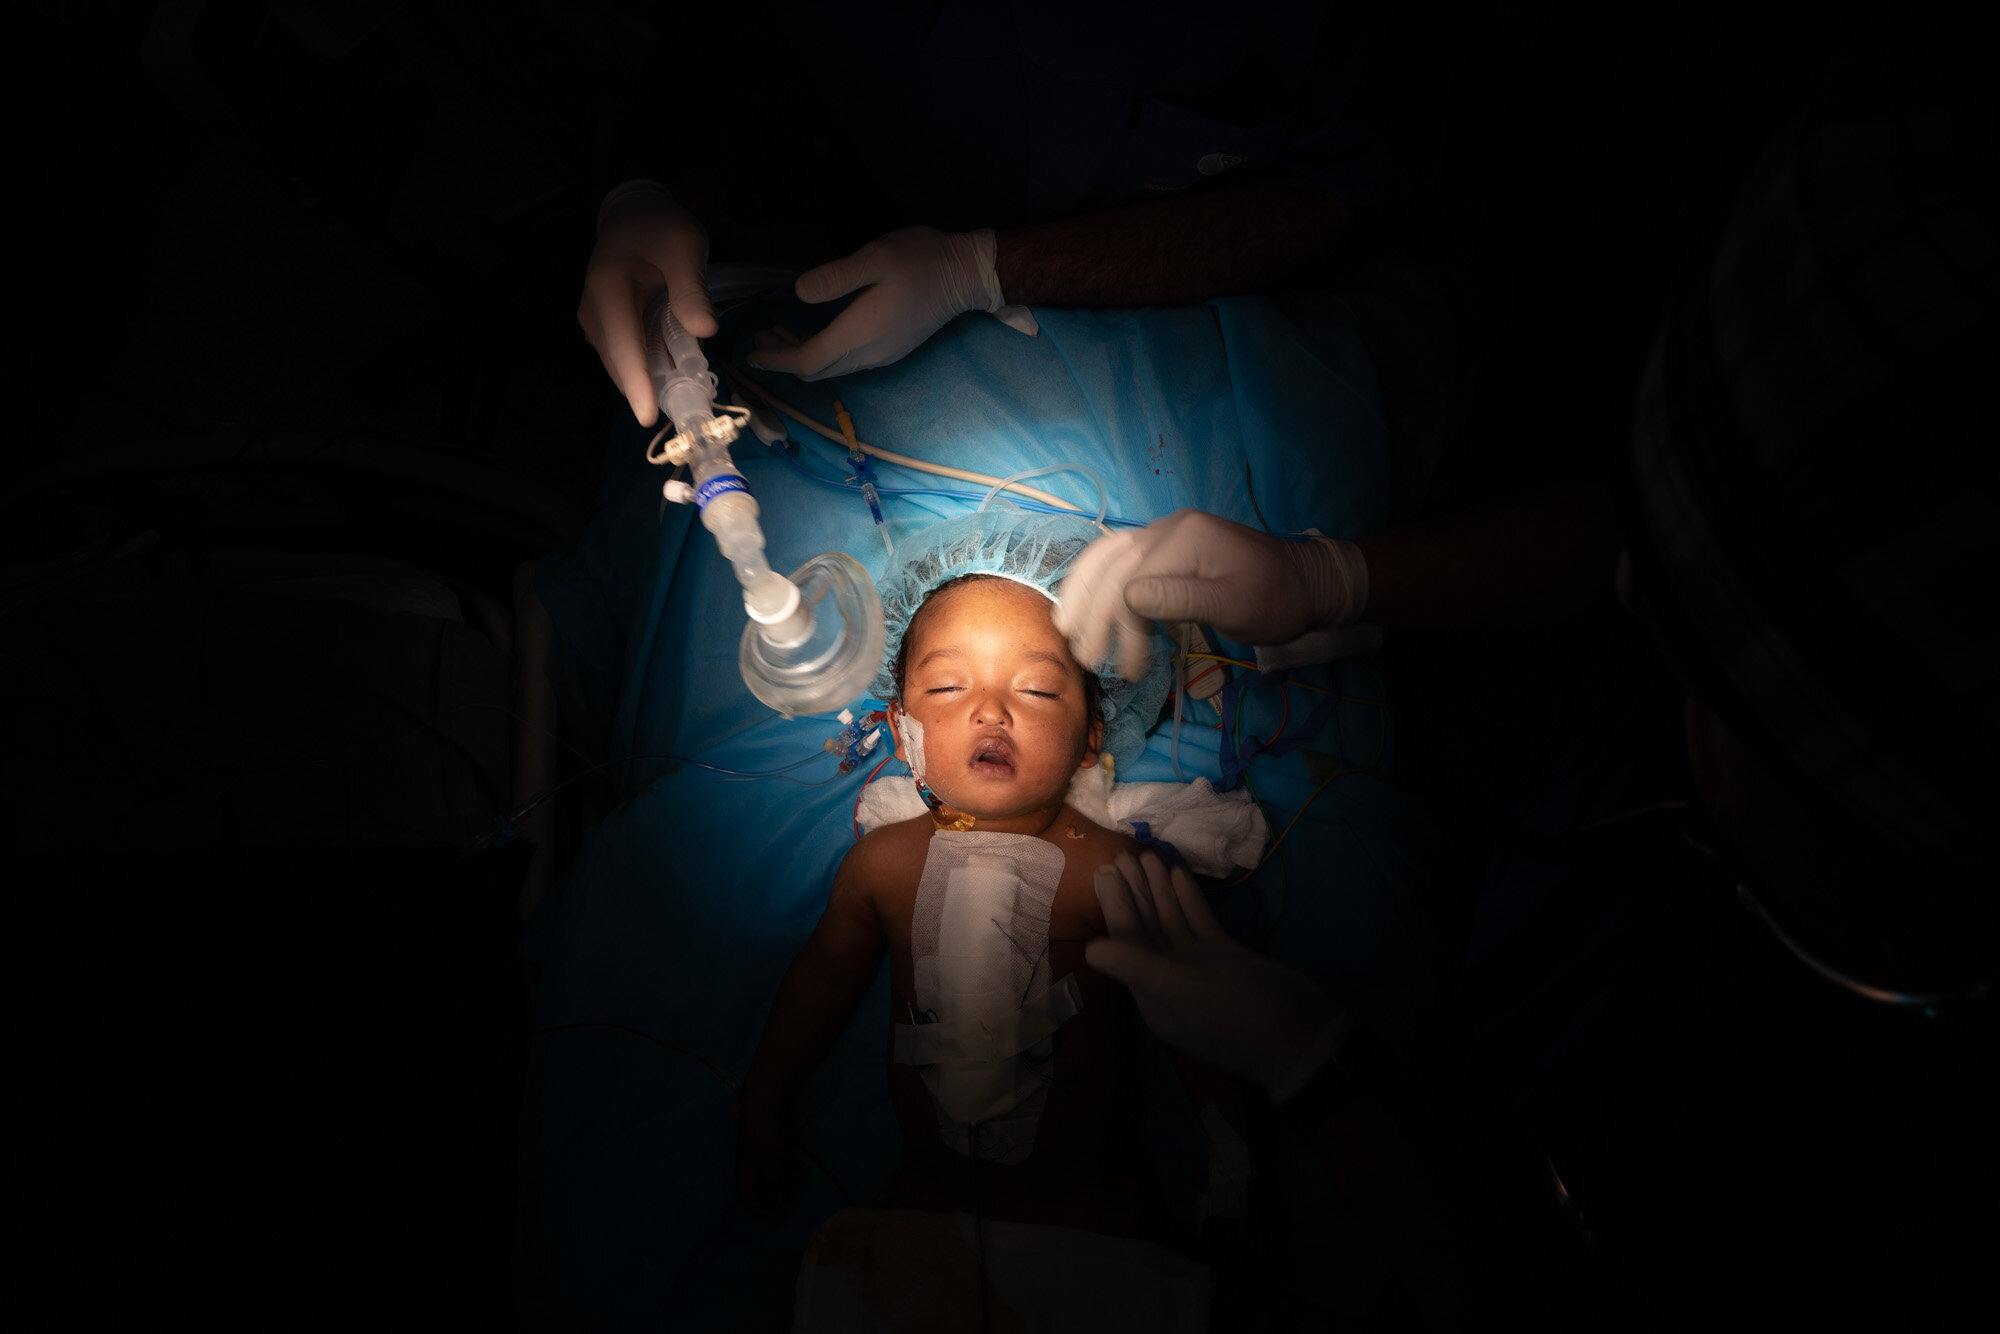  One-year-old Yazan has his oxygen mask removed after heart surgery at the Tajoura National Heart Center in Tripoli, Libya, on Feb. 27, 2020. Yazan’s perilous trek from his small desert hometown culminated in a five-hour surgery. He is one of 1,000 c